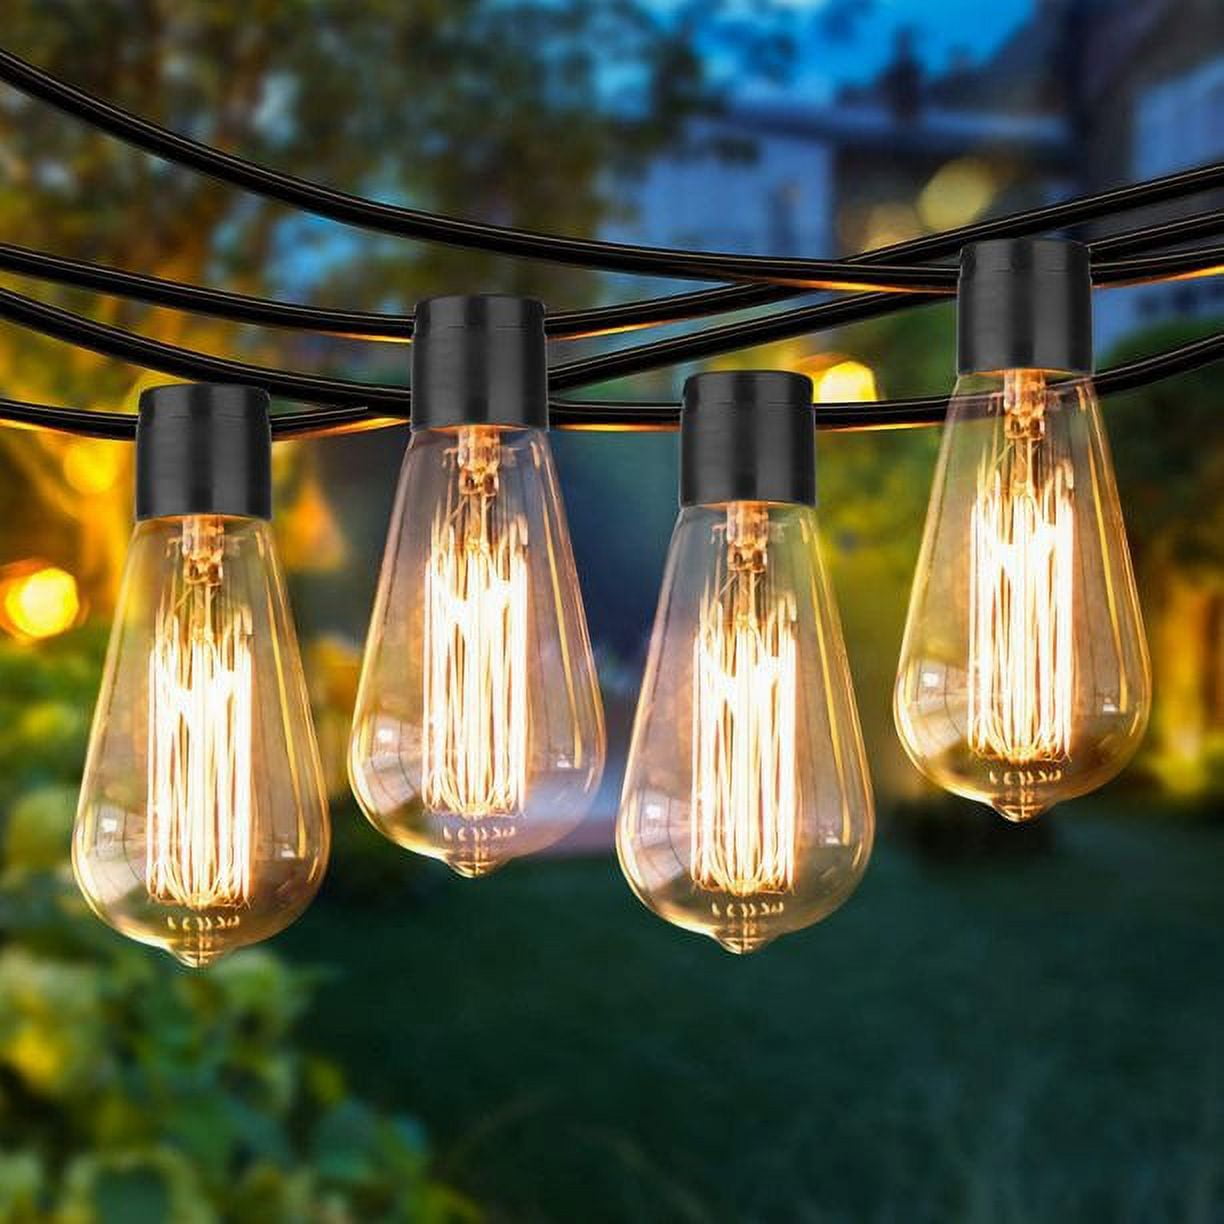 26ft Solar String Lights Outdoor Hanging with 20 Vintage Edison  Shatterproof Bulbs, Waterproof Commercial Grade LED Light, for Patio Garden  Backyard Bistro/Cafe Ambience, Warm White 